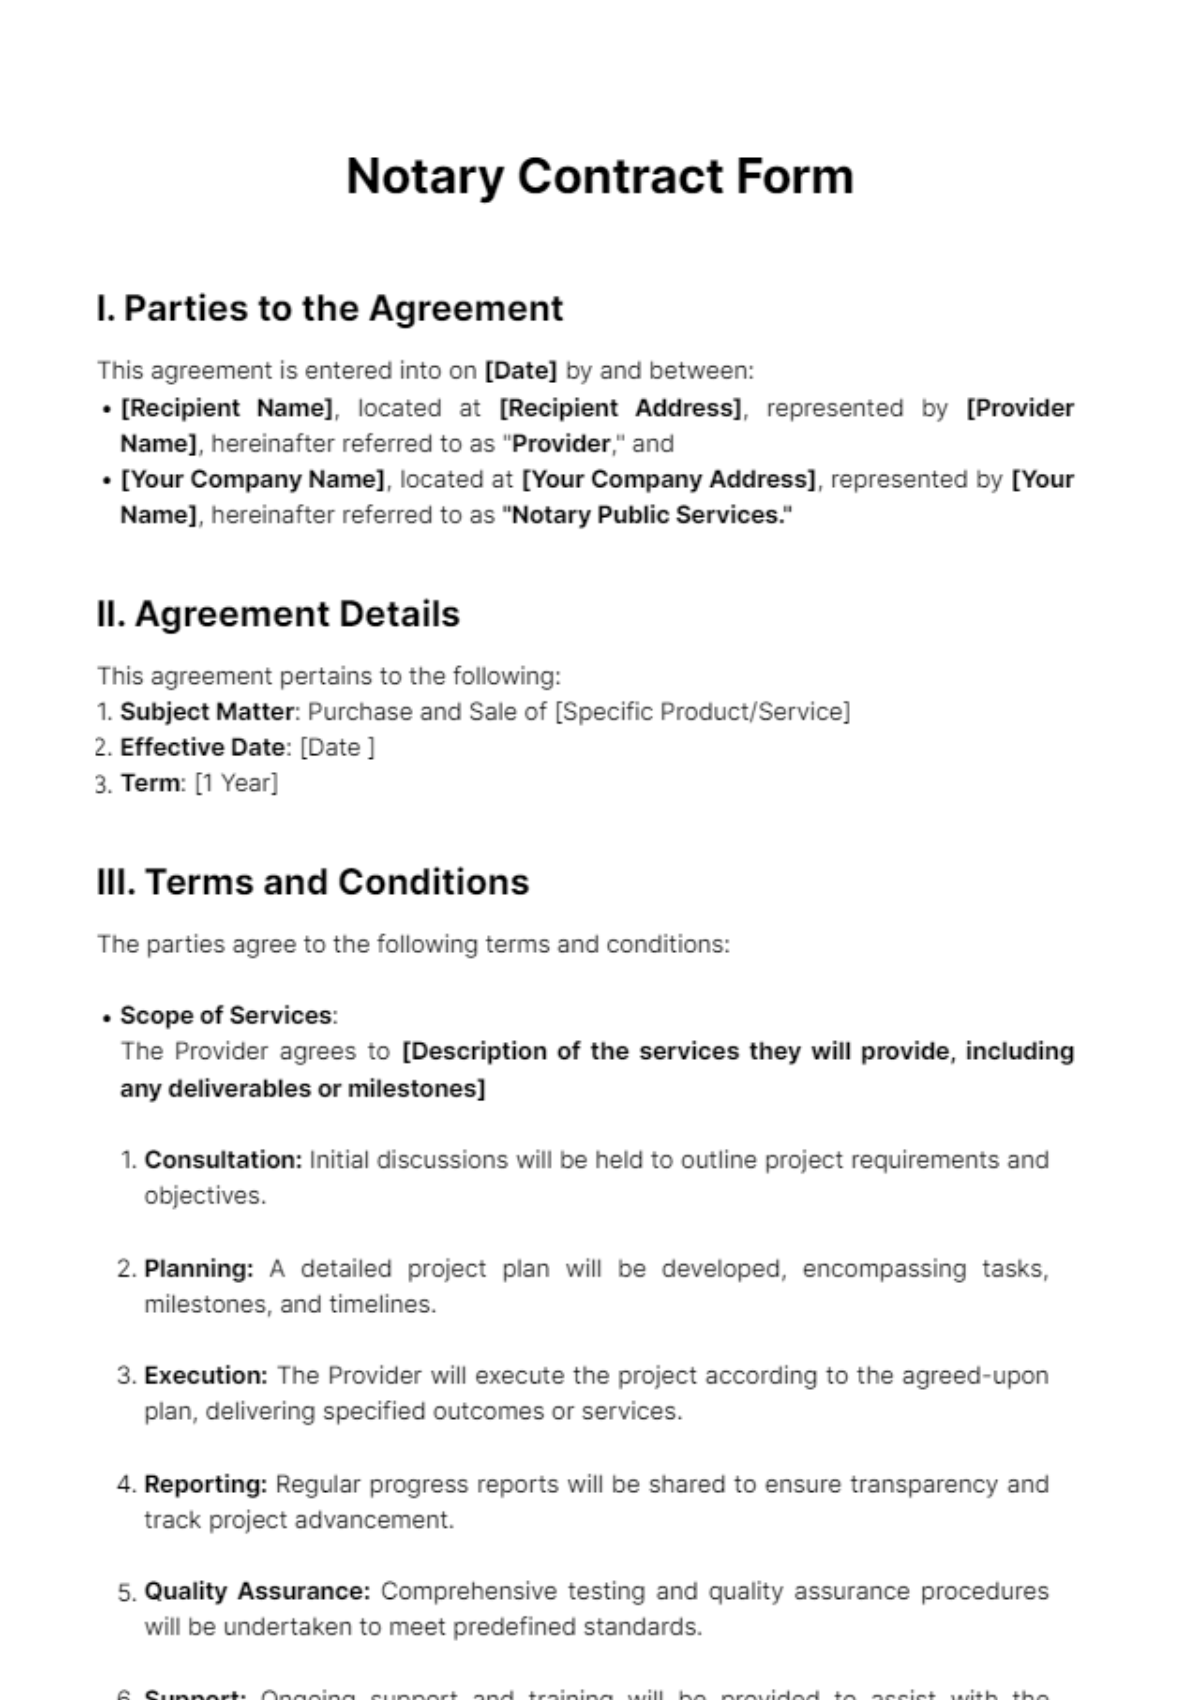 Free Notary Contract Form Template